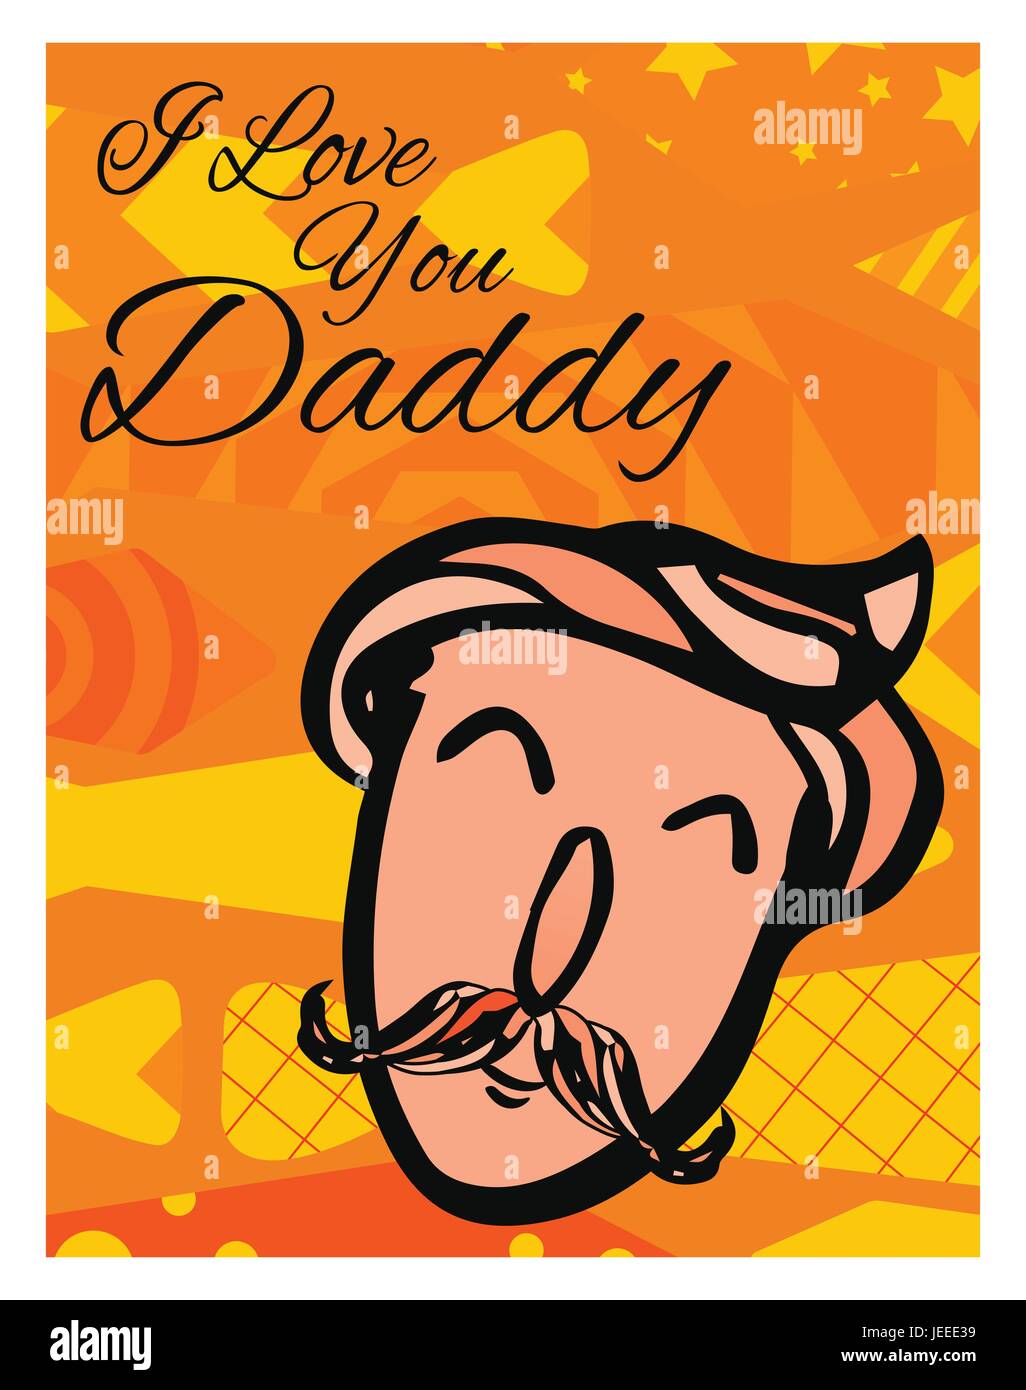 Greeting card with fathers day message Stock Vector